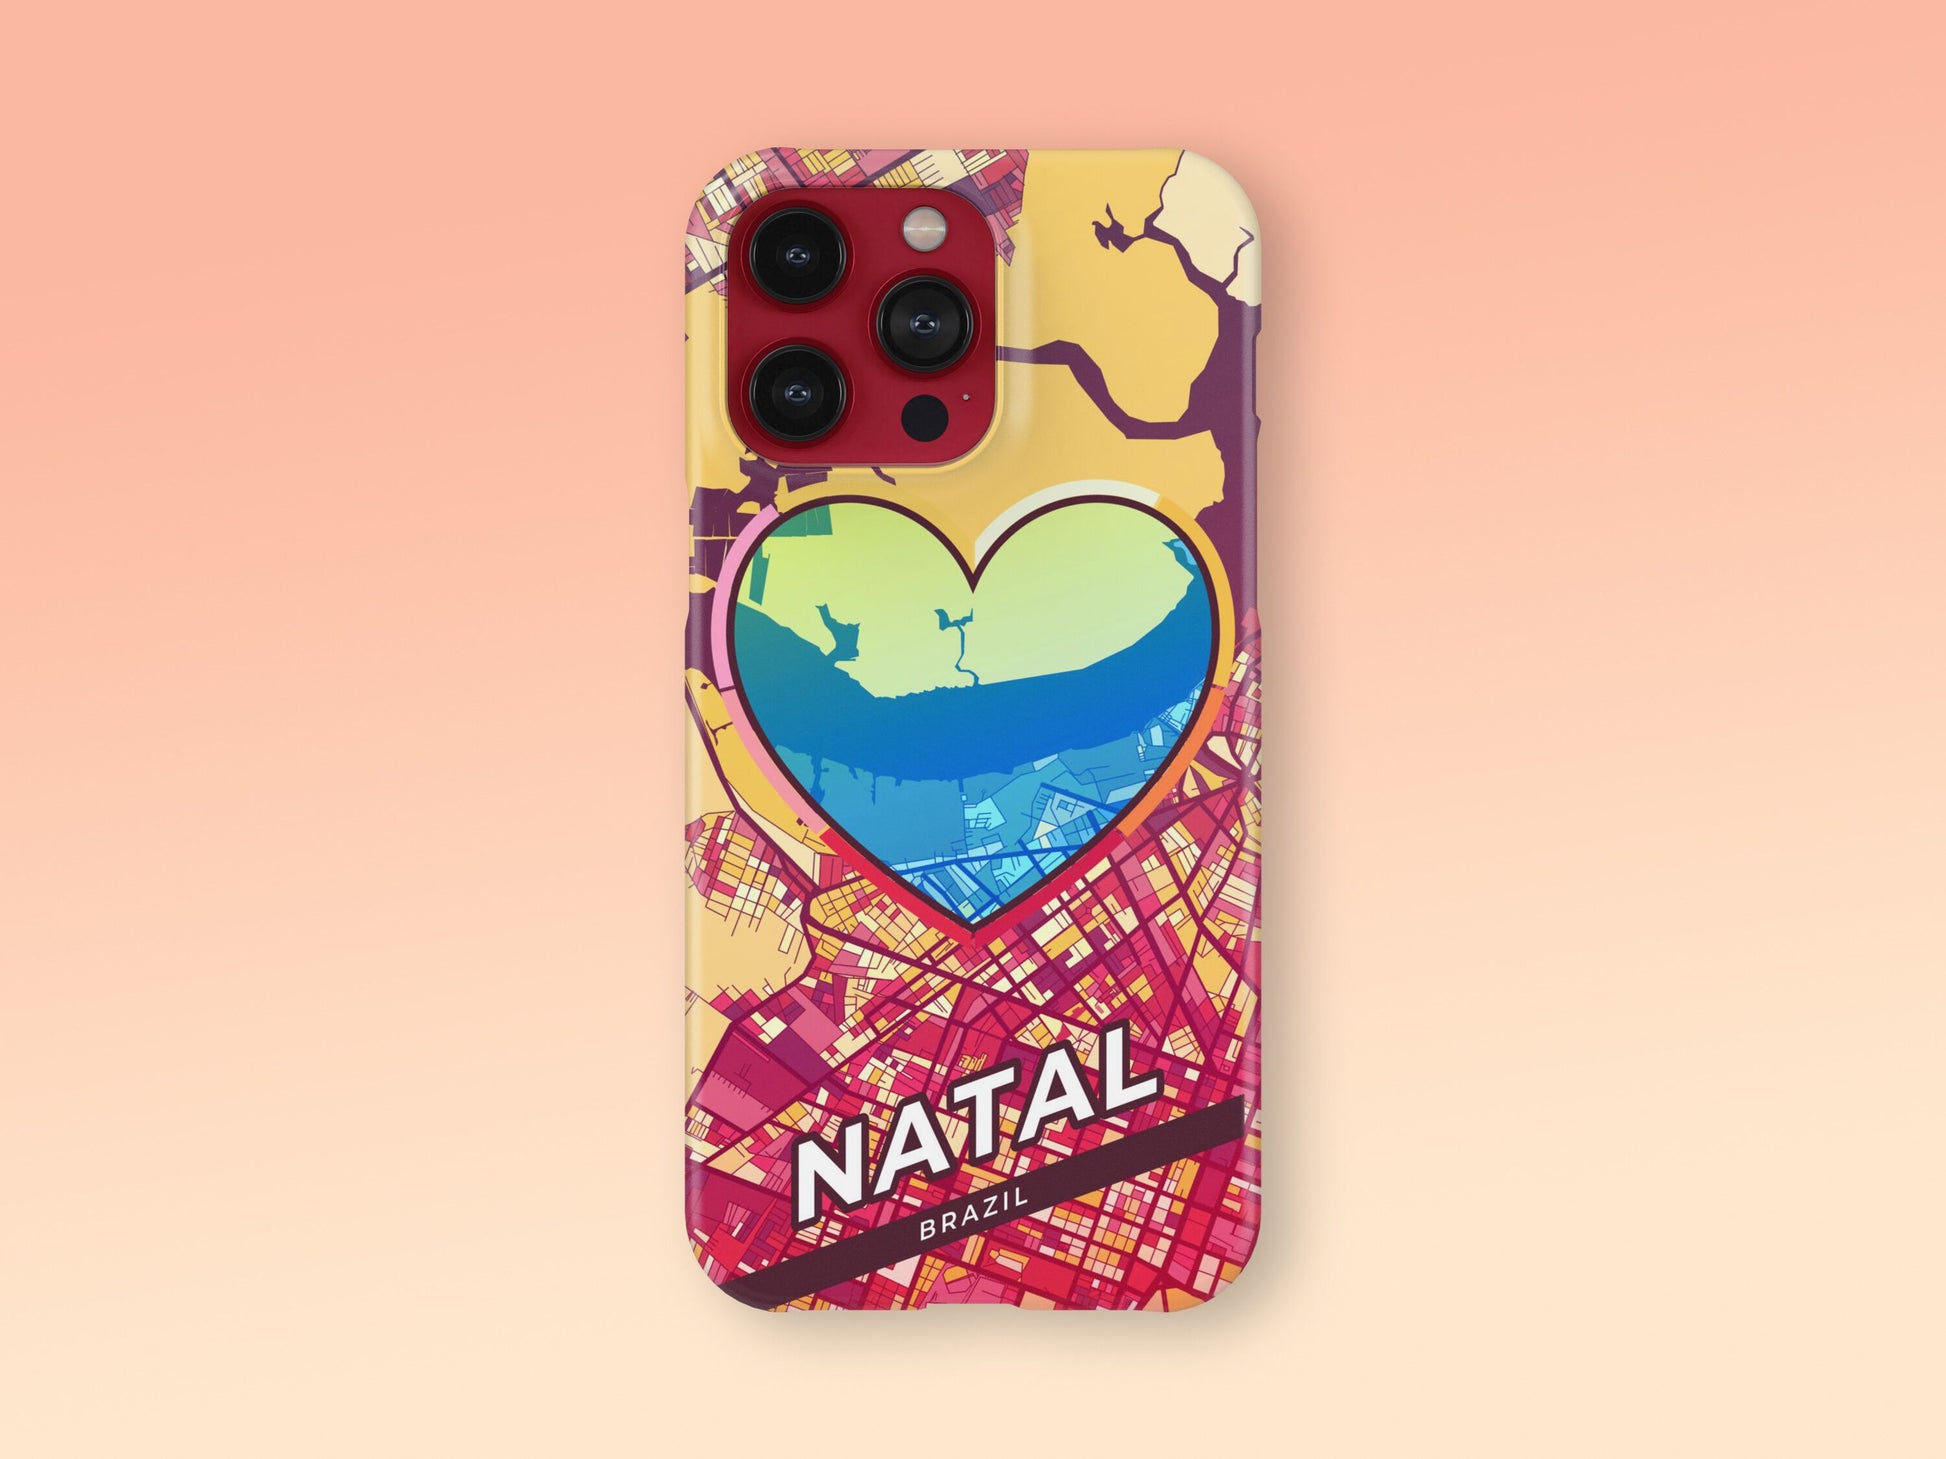 Natal Brazil slim phone case with colorful icon 2